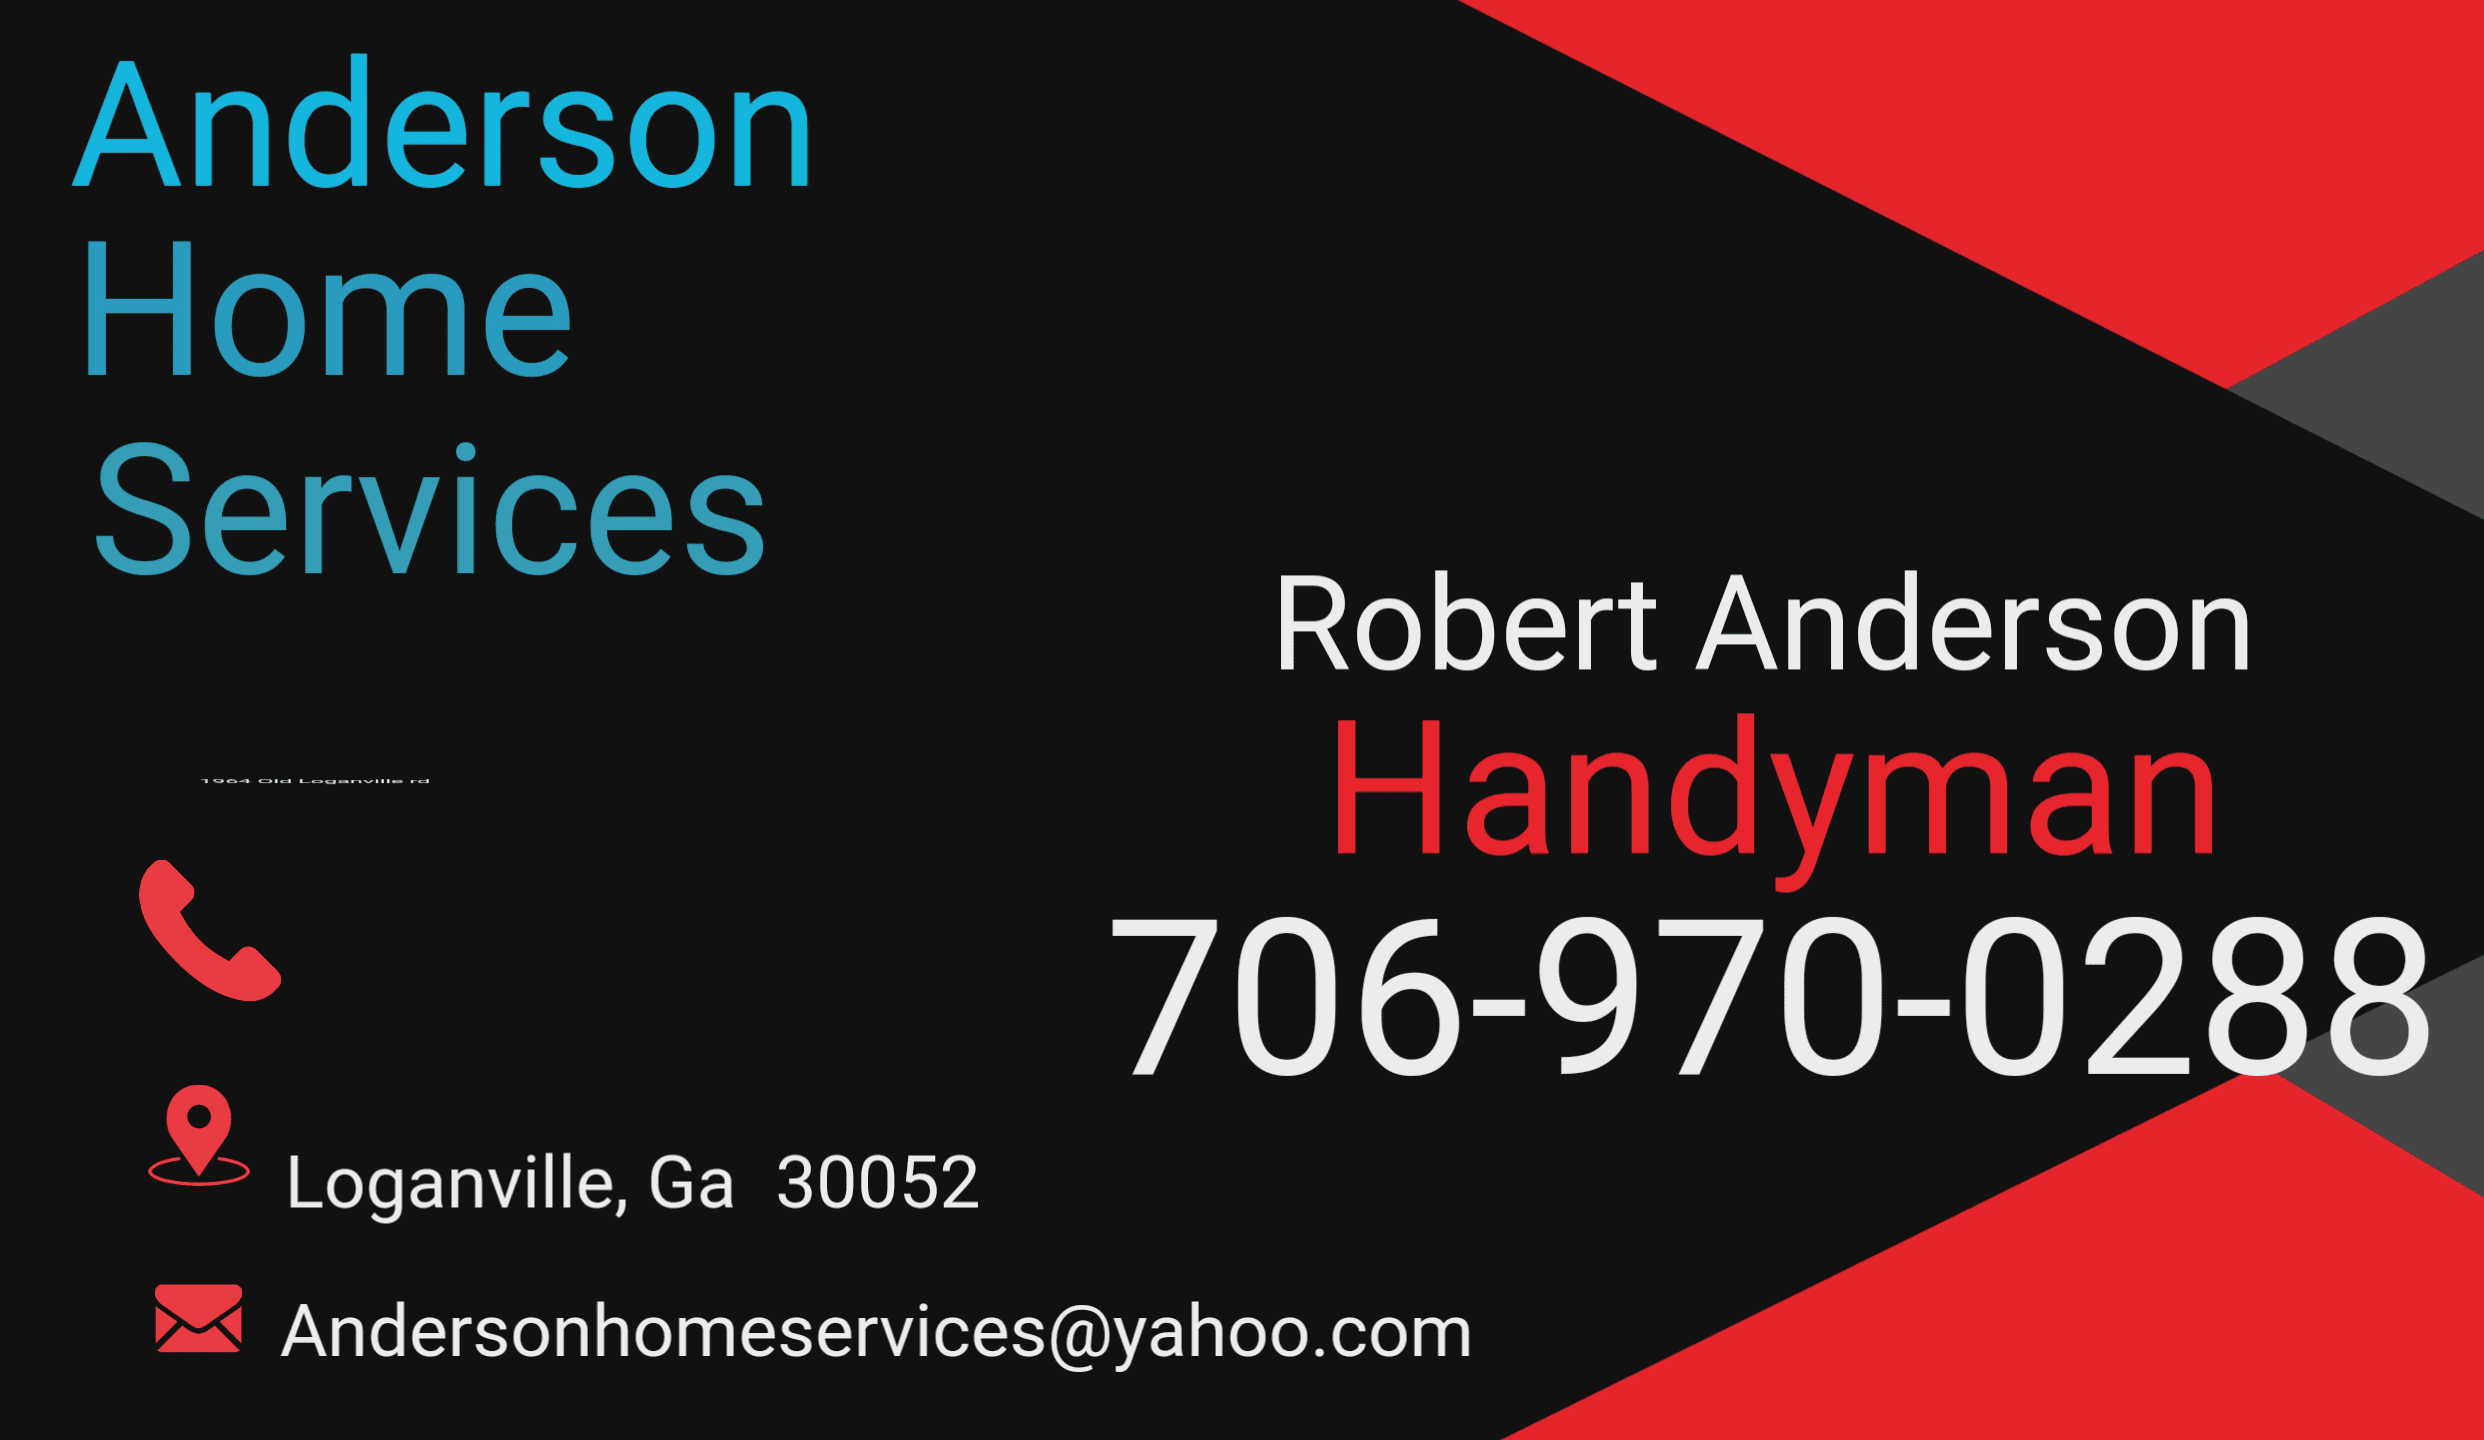 Anderson Home Services